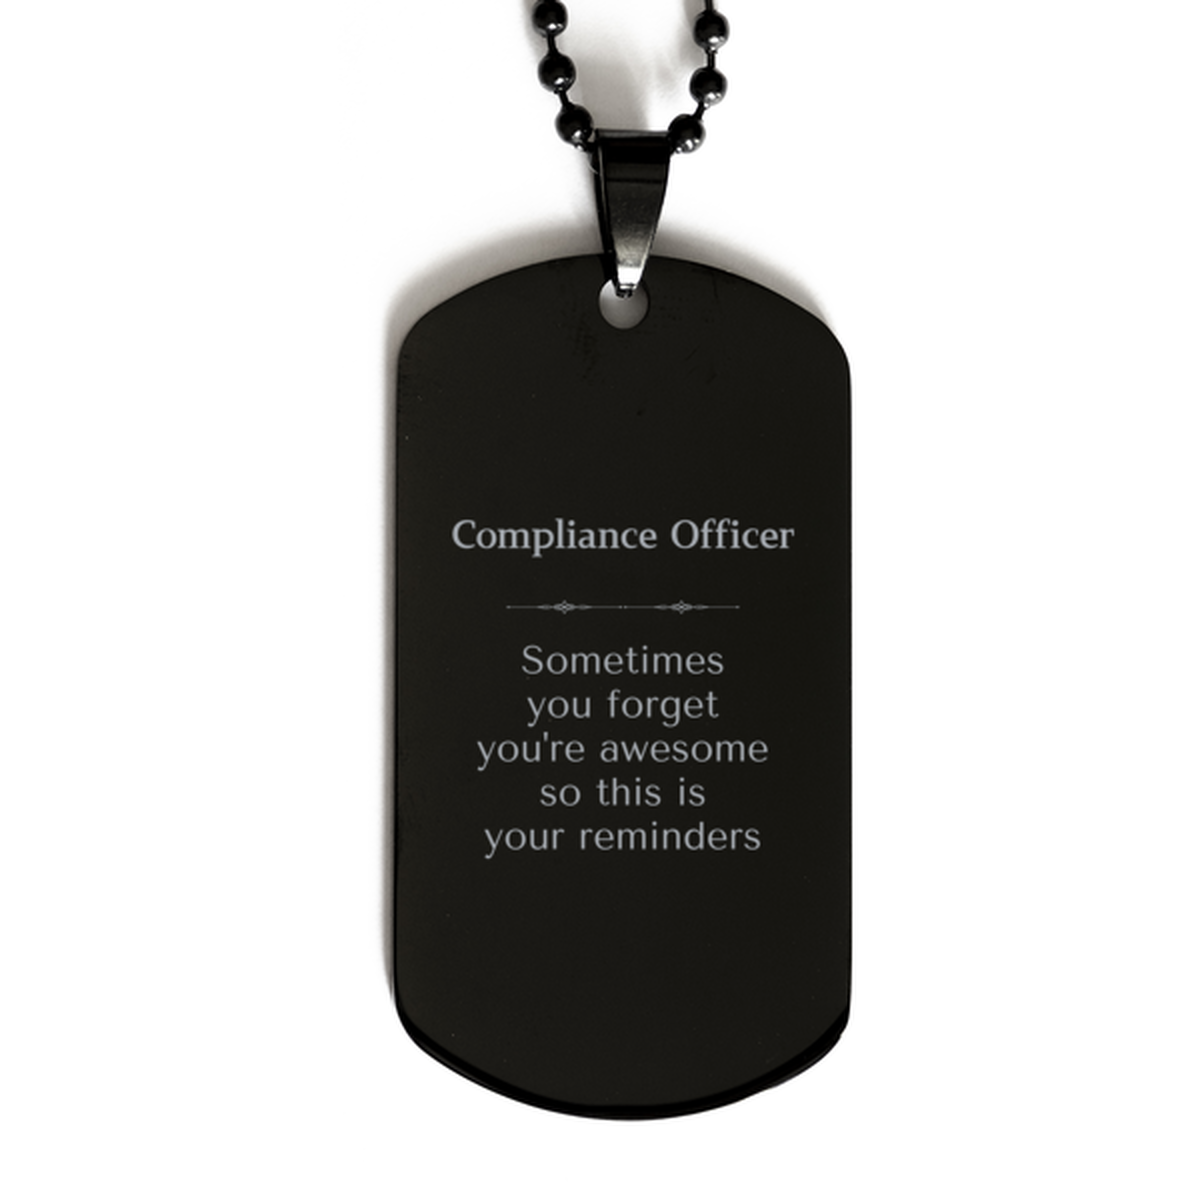 Sentimental Compliance Officer Black Dog Tag, Compliance Officer Sometimes you forget you're awesome so this is your reminders, Graduation Christmas Birthday Gifts for Compliance Officer, Men, Women, Coworkers